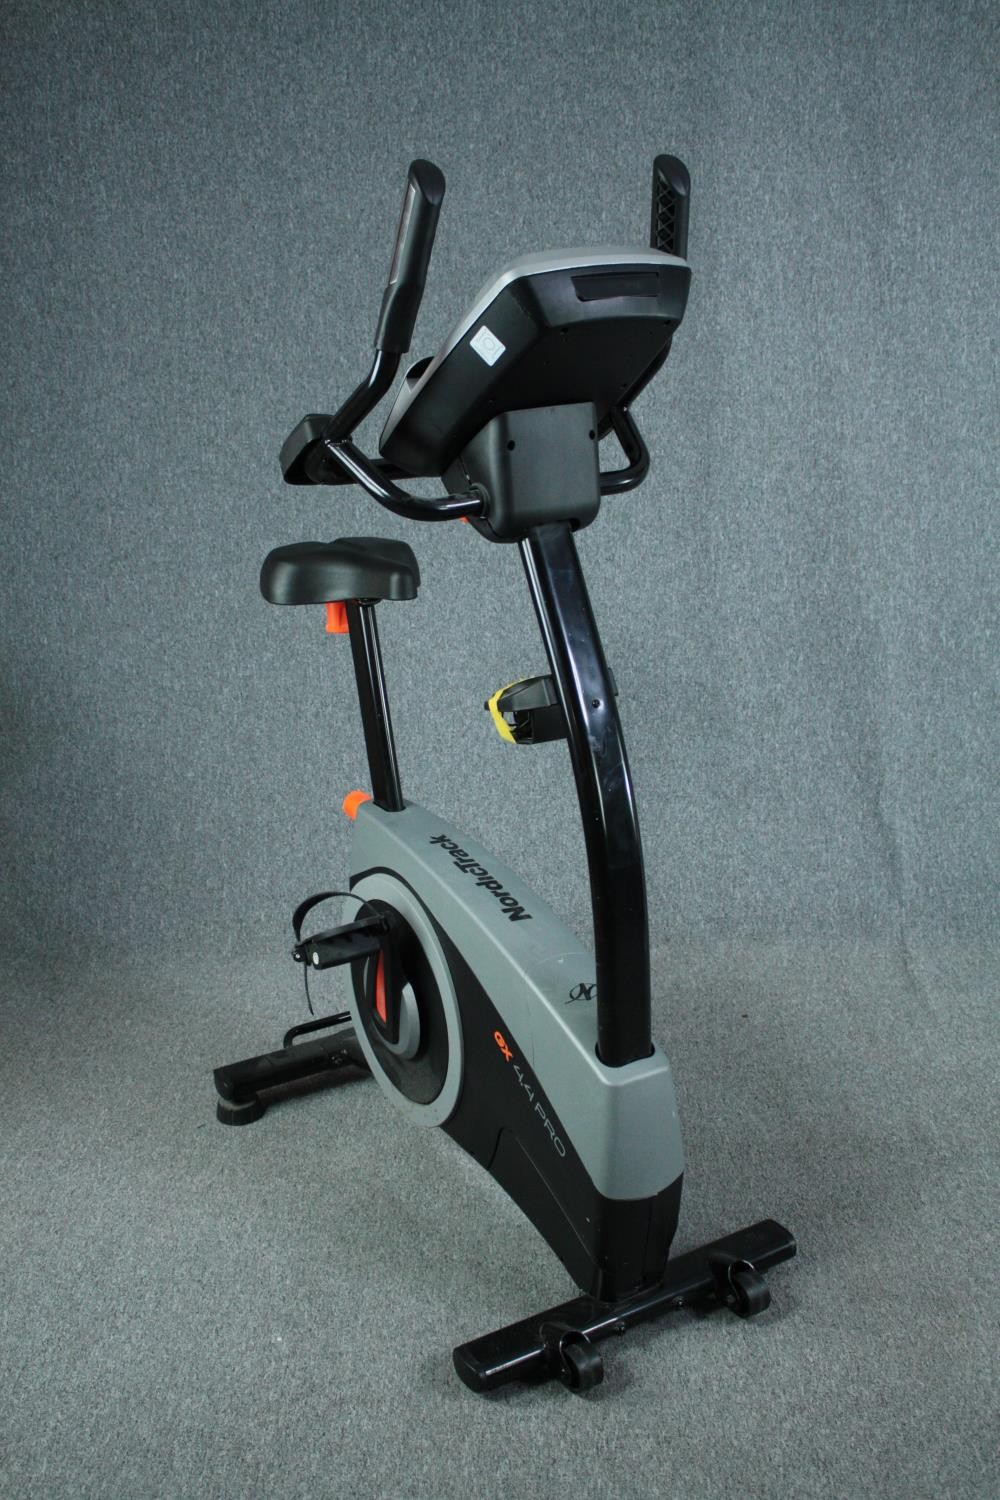 A contemporary NordicTrack exercise bike. H.160 W.110 D.31cm. - Image 3 of 7